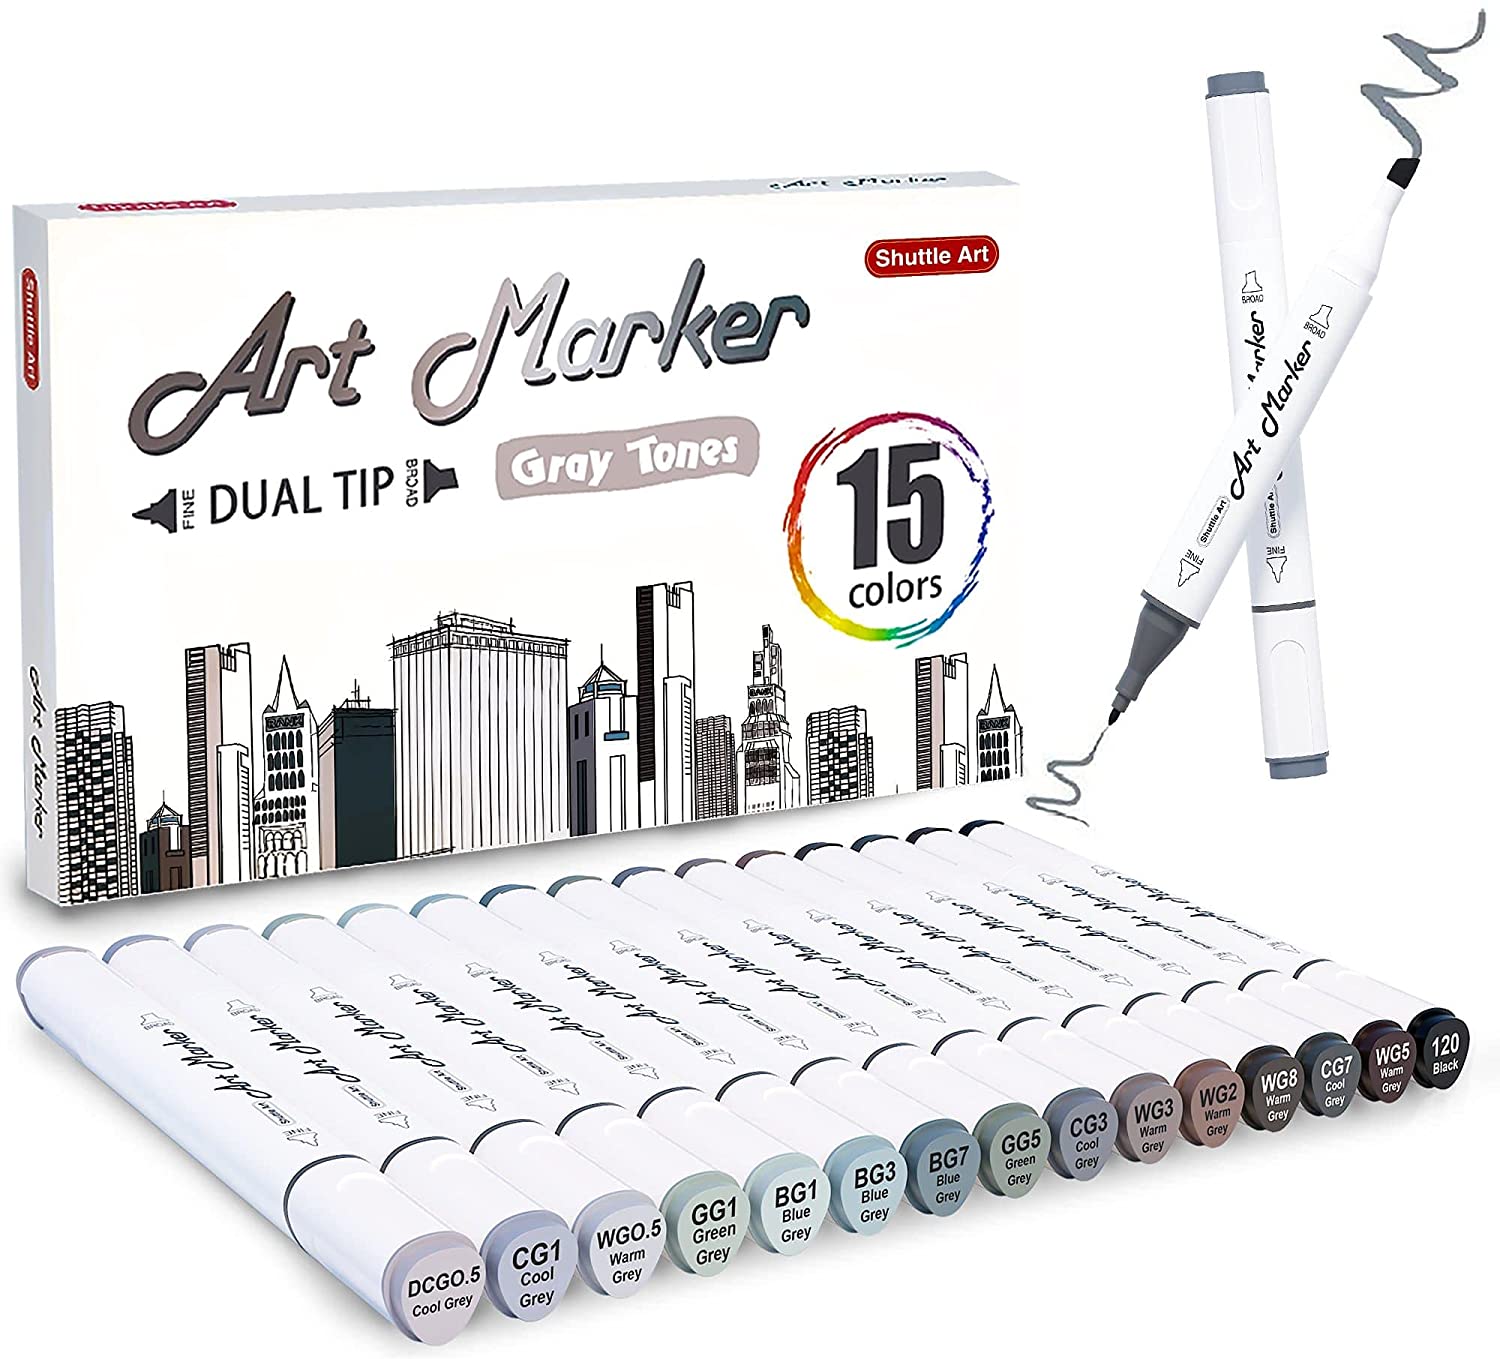 30 Colors Dual Tip Alcohol Based Art Markers,Shuttle Art Alcohol